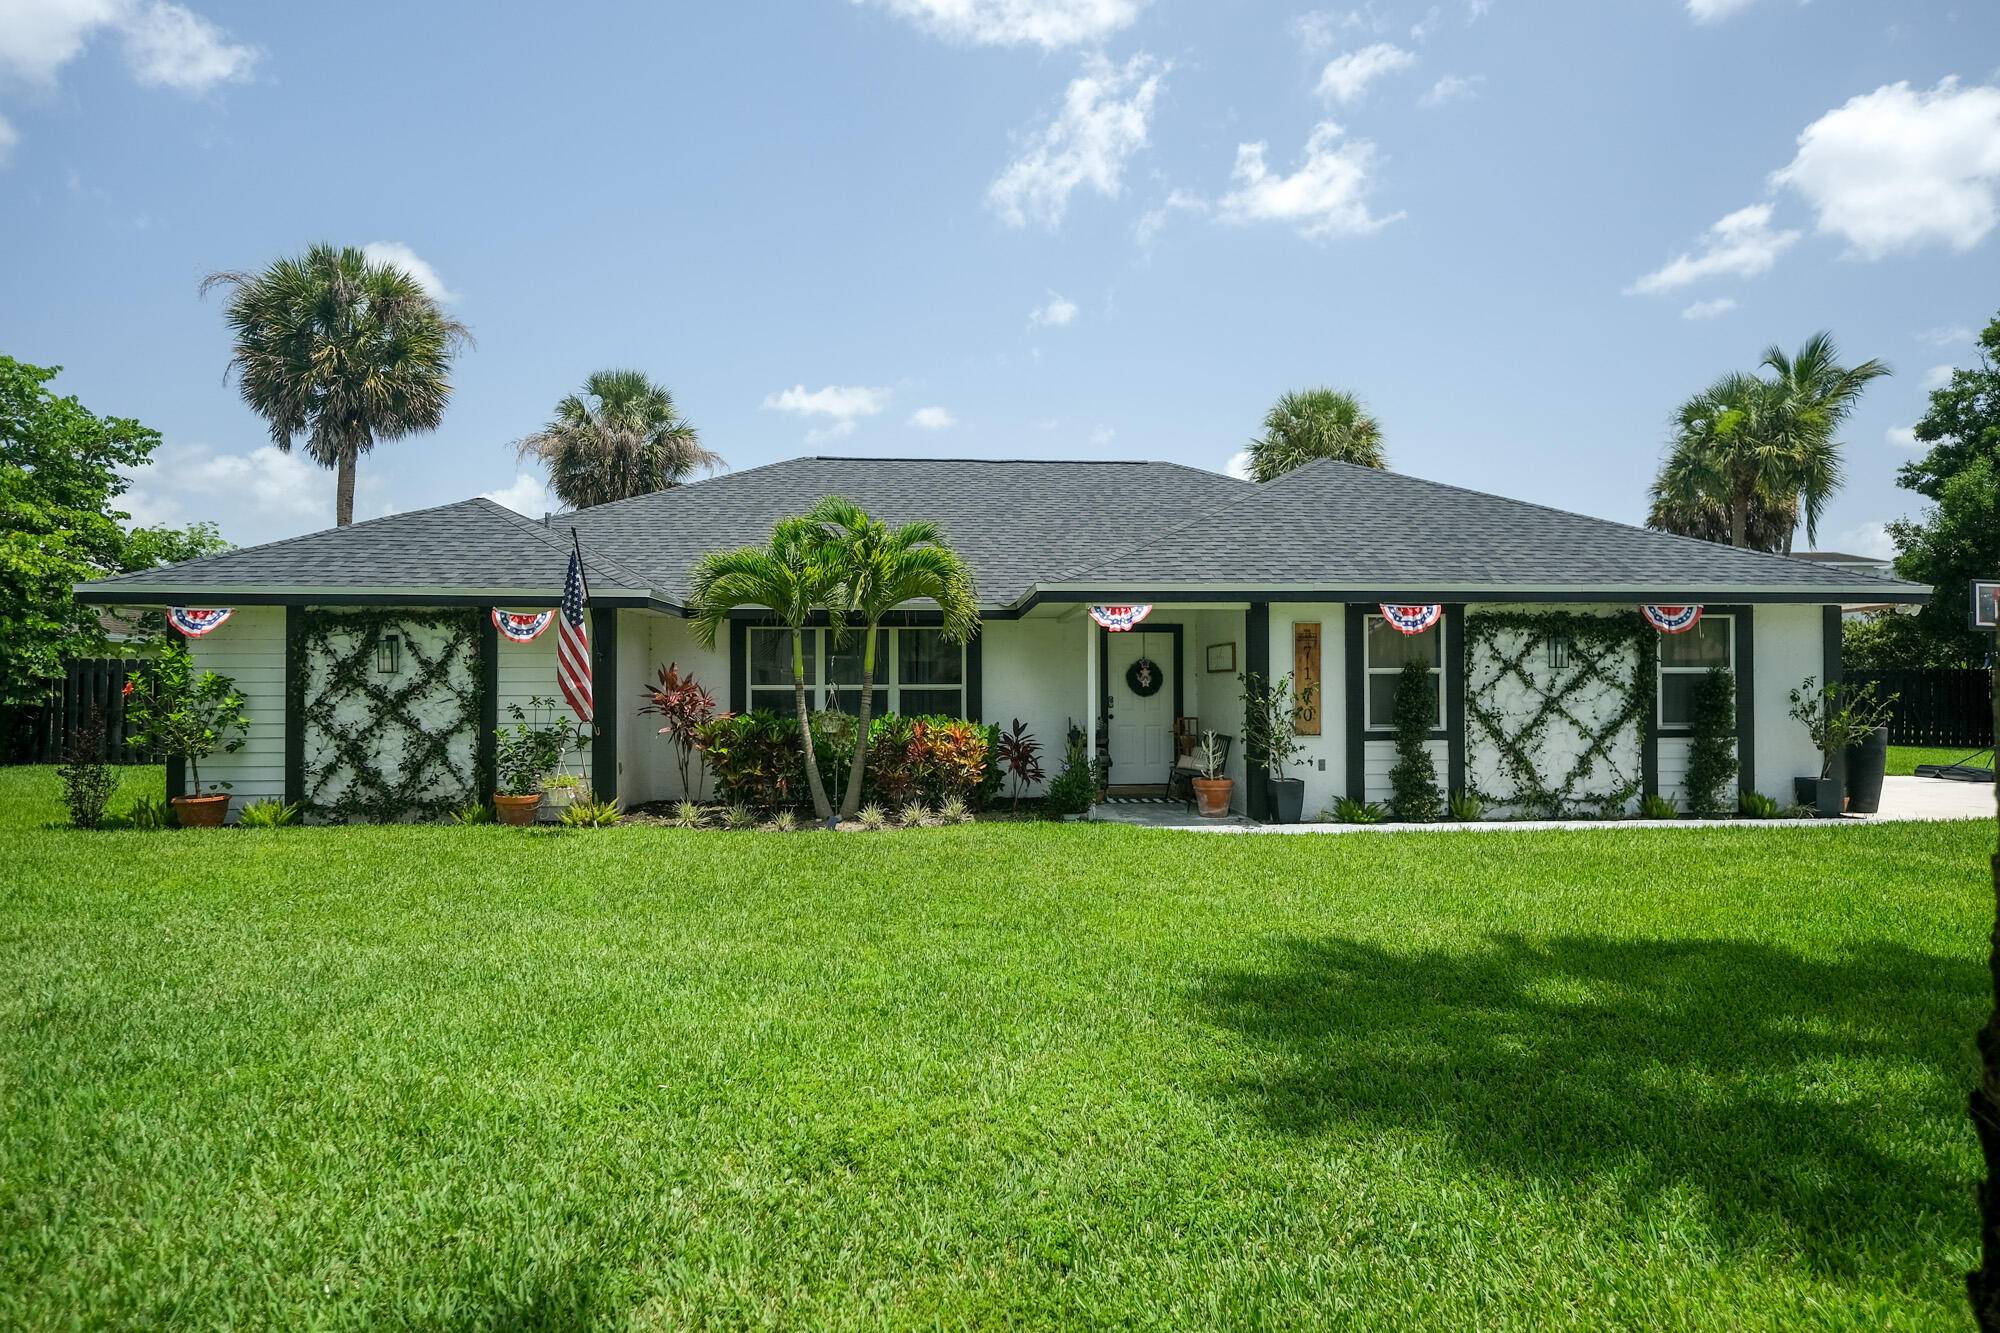 Come and enjoy this season with is amazing fully renovated large 3 bedroom single family home in the heart or all what palm beach county offers.